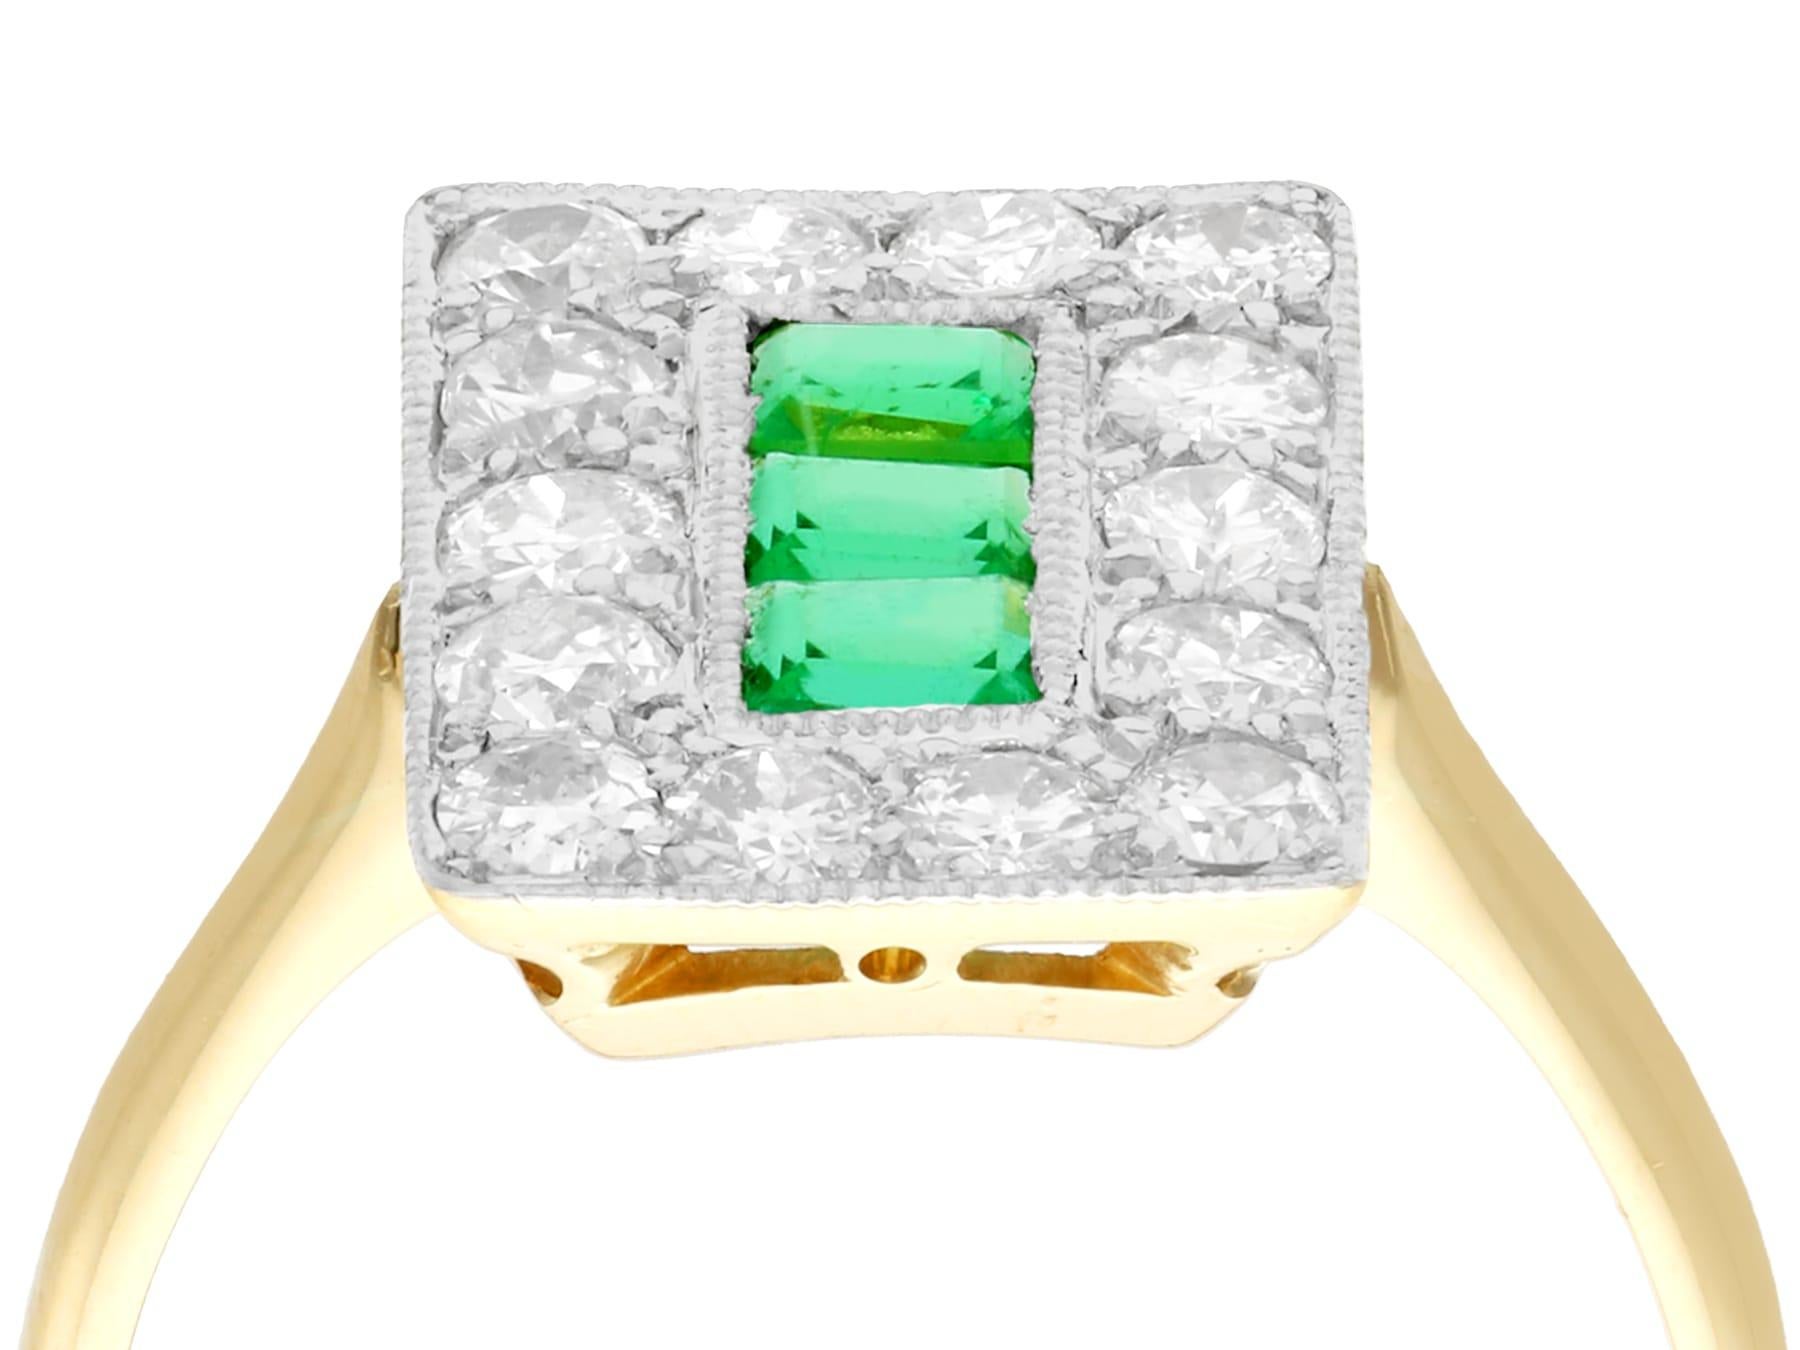 A fine and impressive 0.57 carat natural emerald and 1.33 carat diamond, 18 karat yellow gold, platinum set dress ring; part of our diverse range of emerald jewelry.

This fine and impressive antique emerald and diamond ring has been crafted in 18k